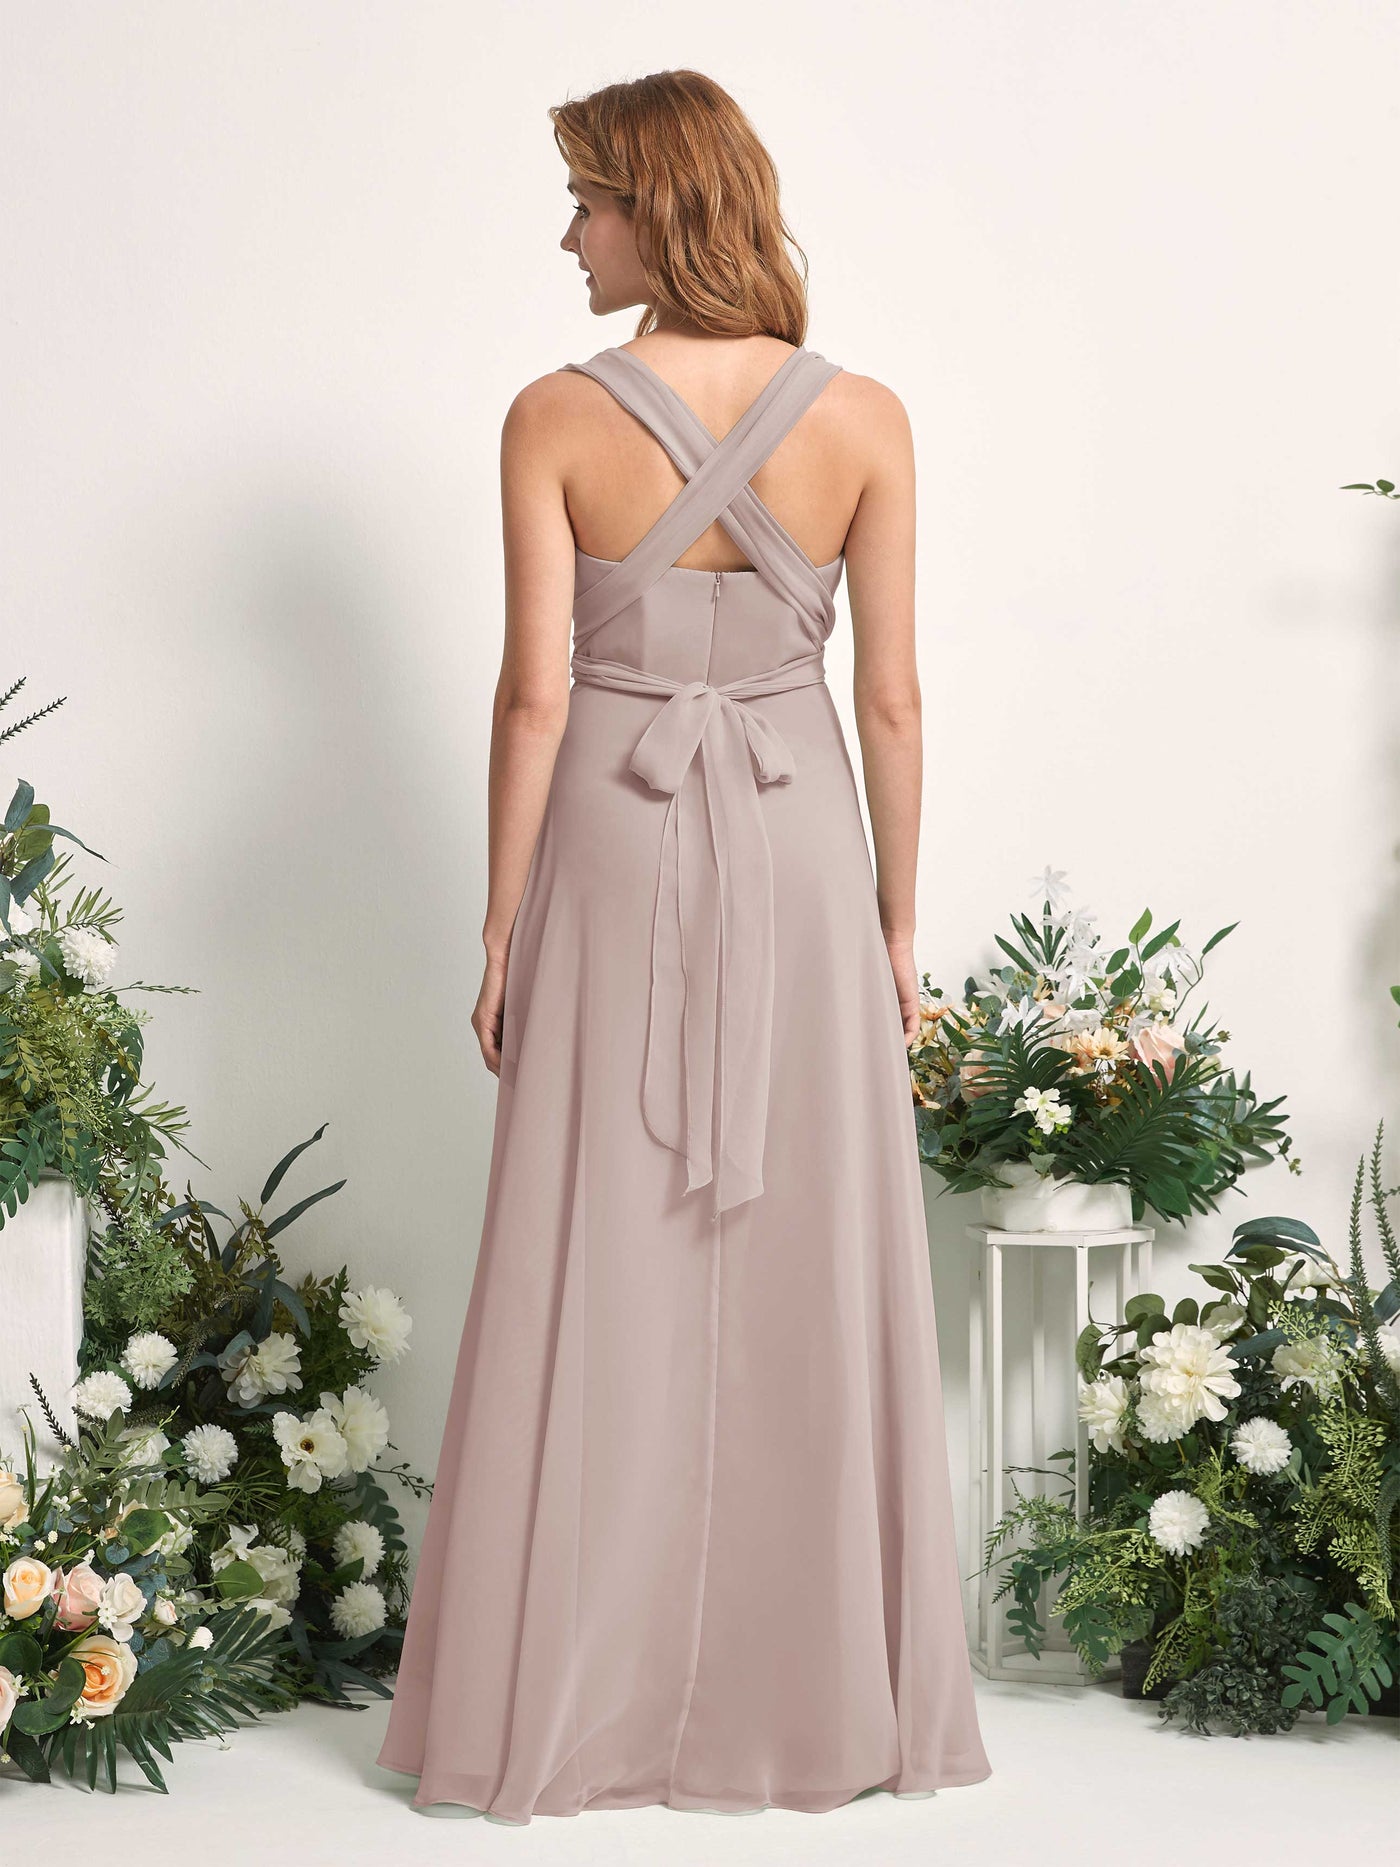 Bridesmaid Dress A-line Chiffon Halter Full Length Short Sleeves Wedding Party Dress - Taupe (81226324)#color_taupe